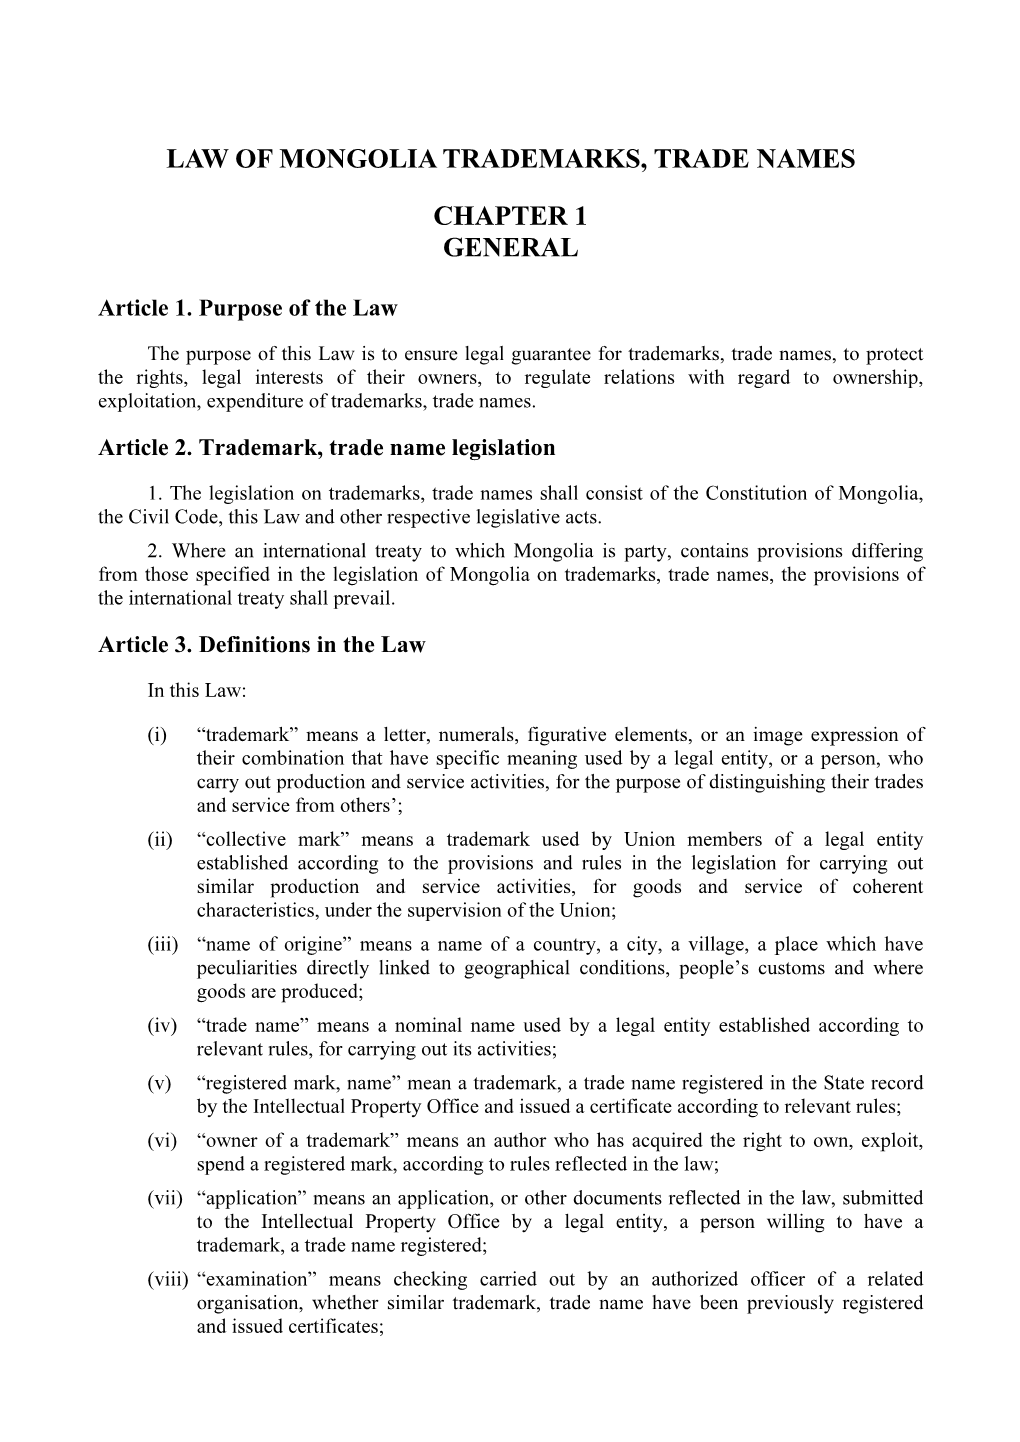 Trademarks, Trade Names Law 1997